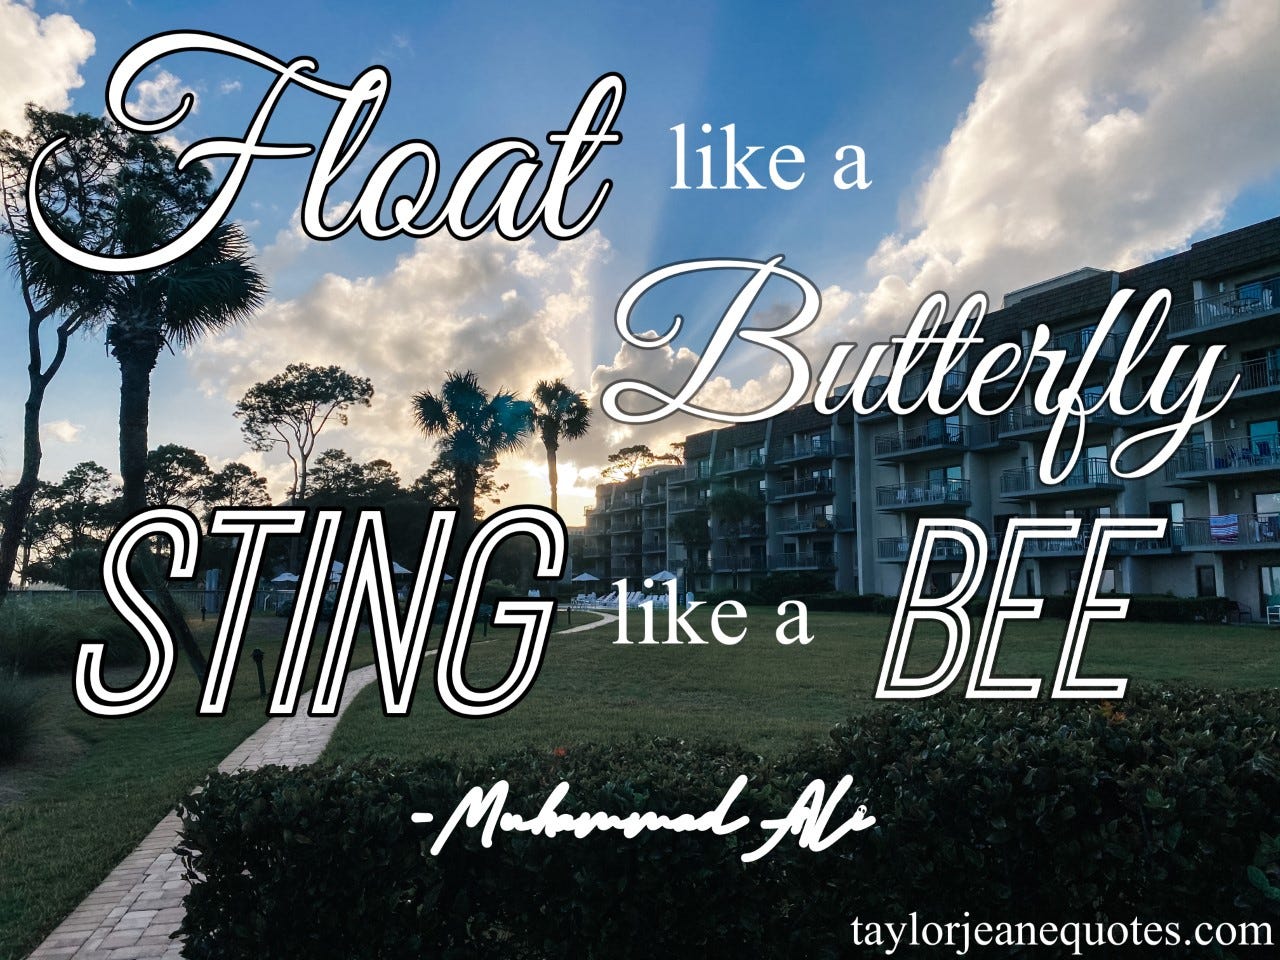 taylor jeane quotes, taylor jeane, taylor wilson, muhammad ali, muhammad ali quotes, float like a butterfly and sting like a bee quote, motivational quotes, inspirational quotes, life quotes, positive quotes